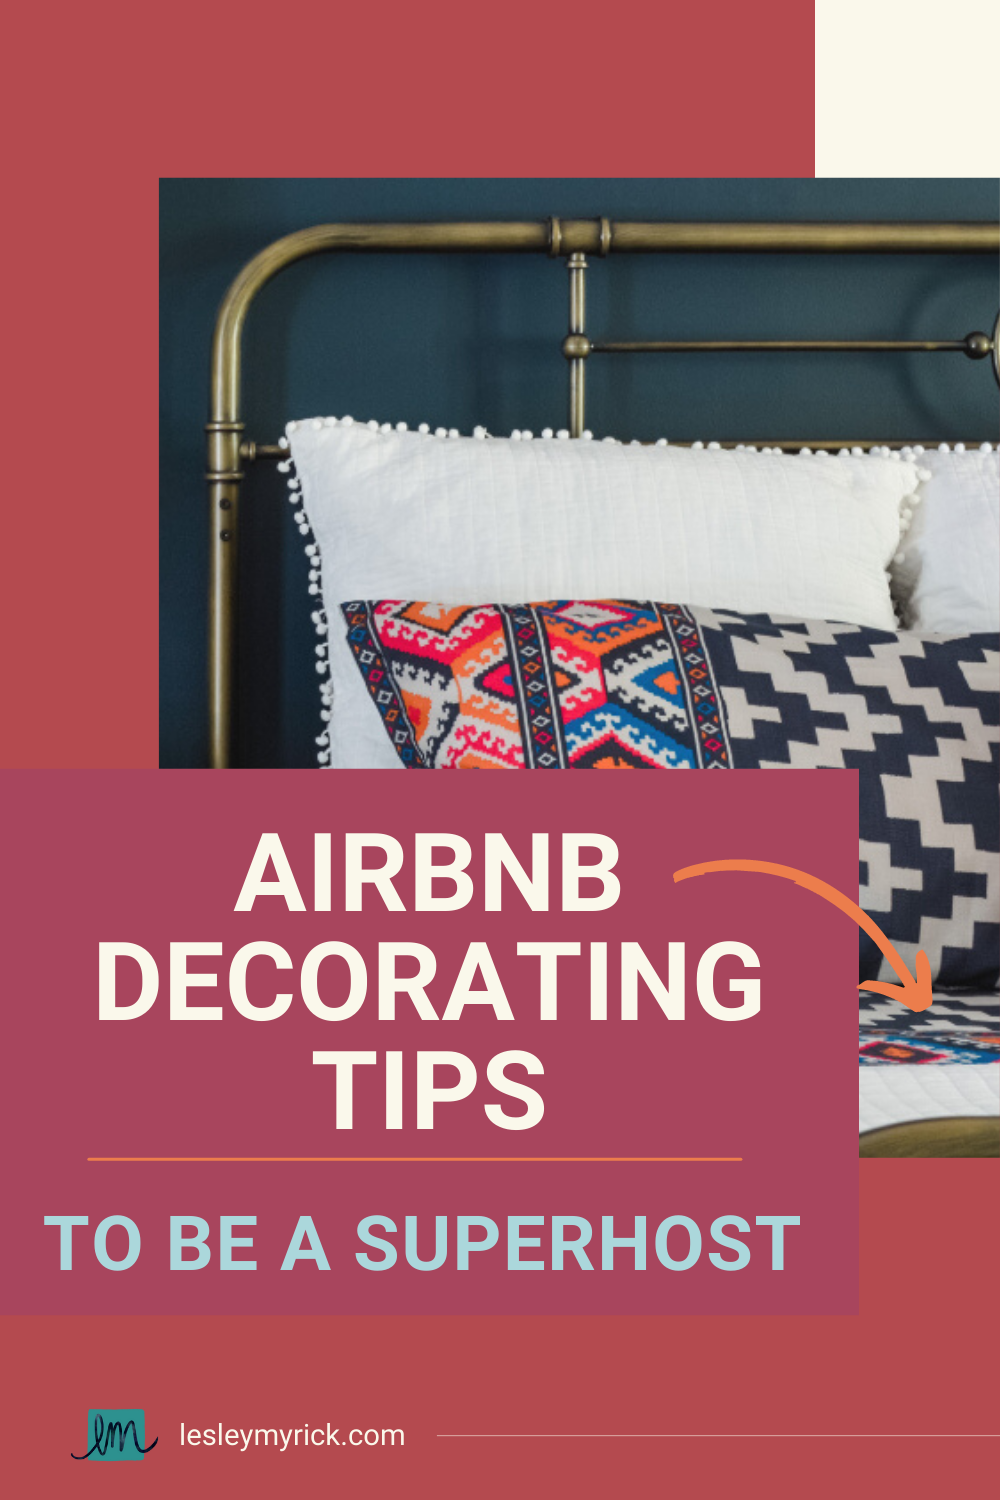 Airbnb decorating tips to become a superhost